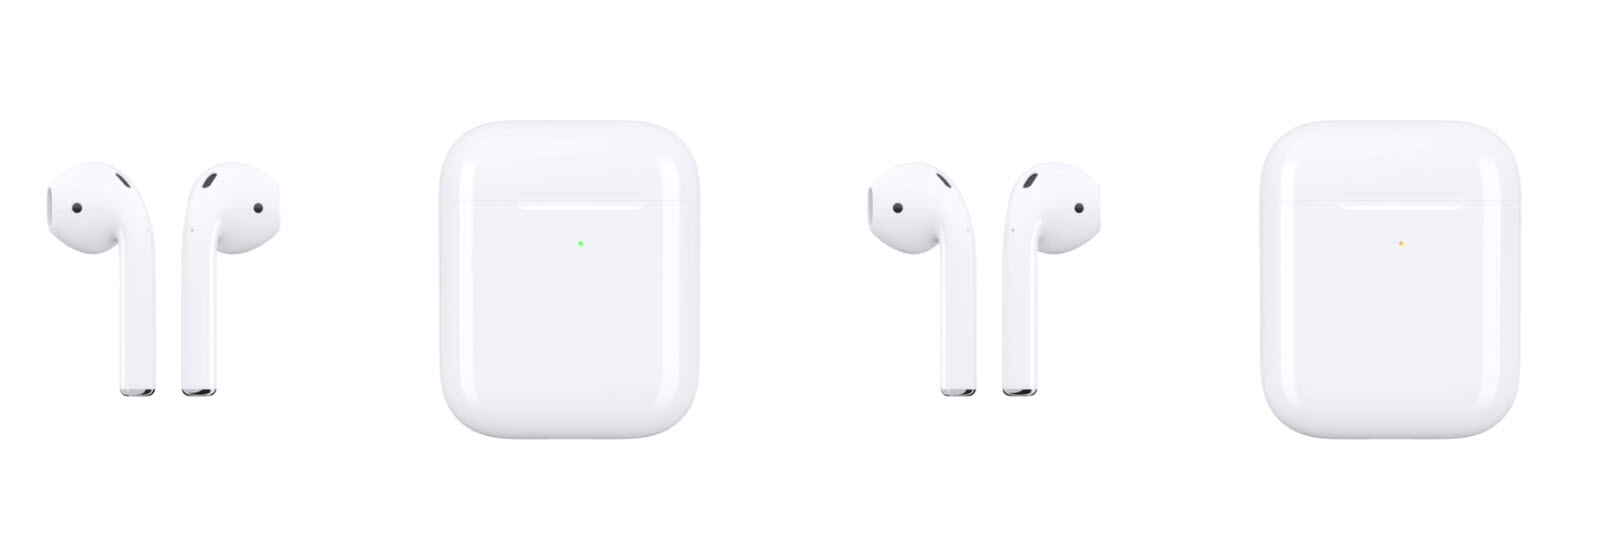 New Airpods Case Ios 12 Beta 5 Img 1